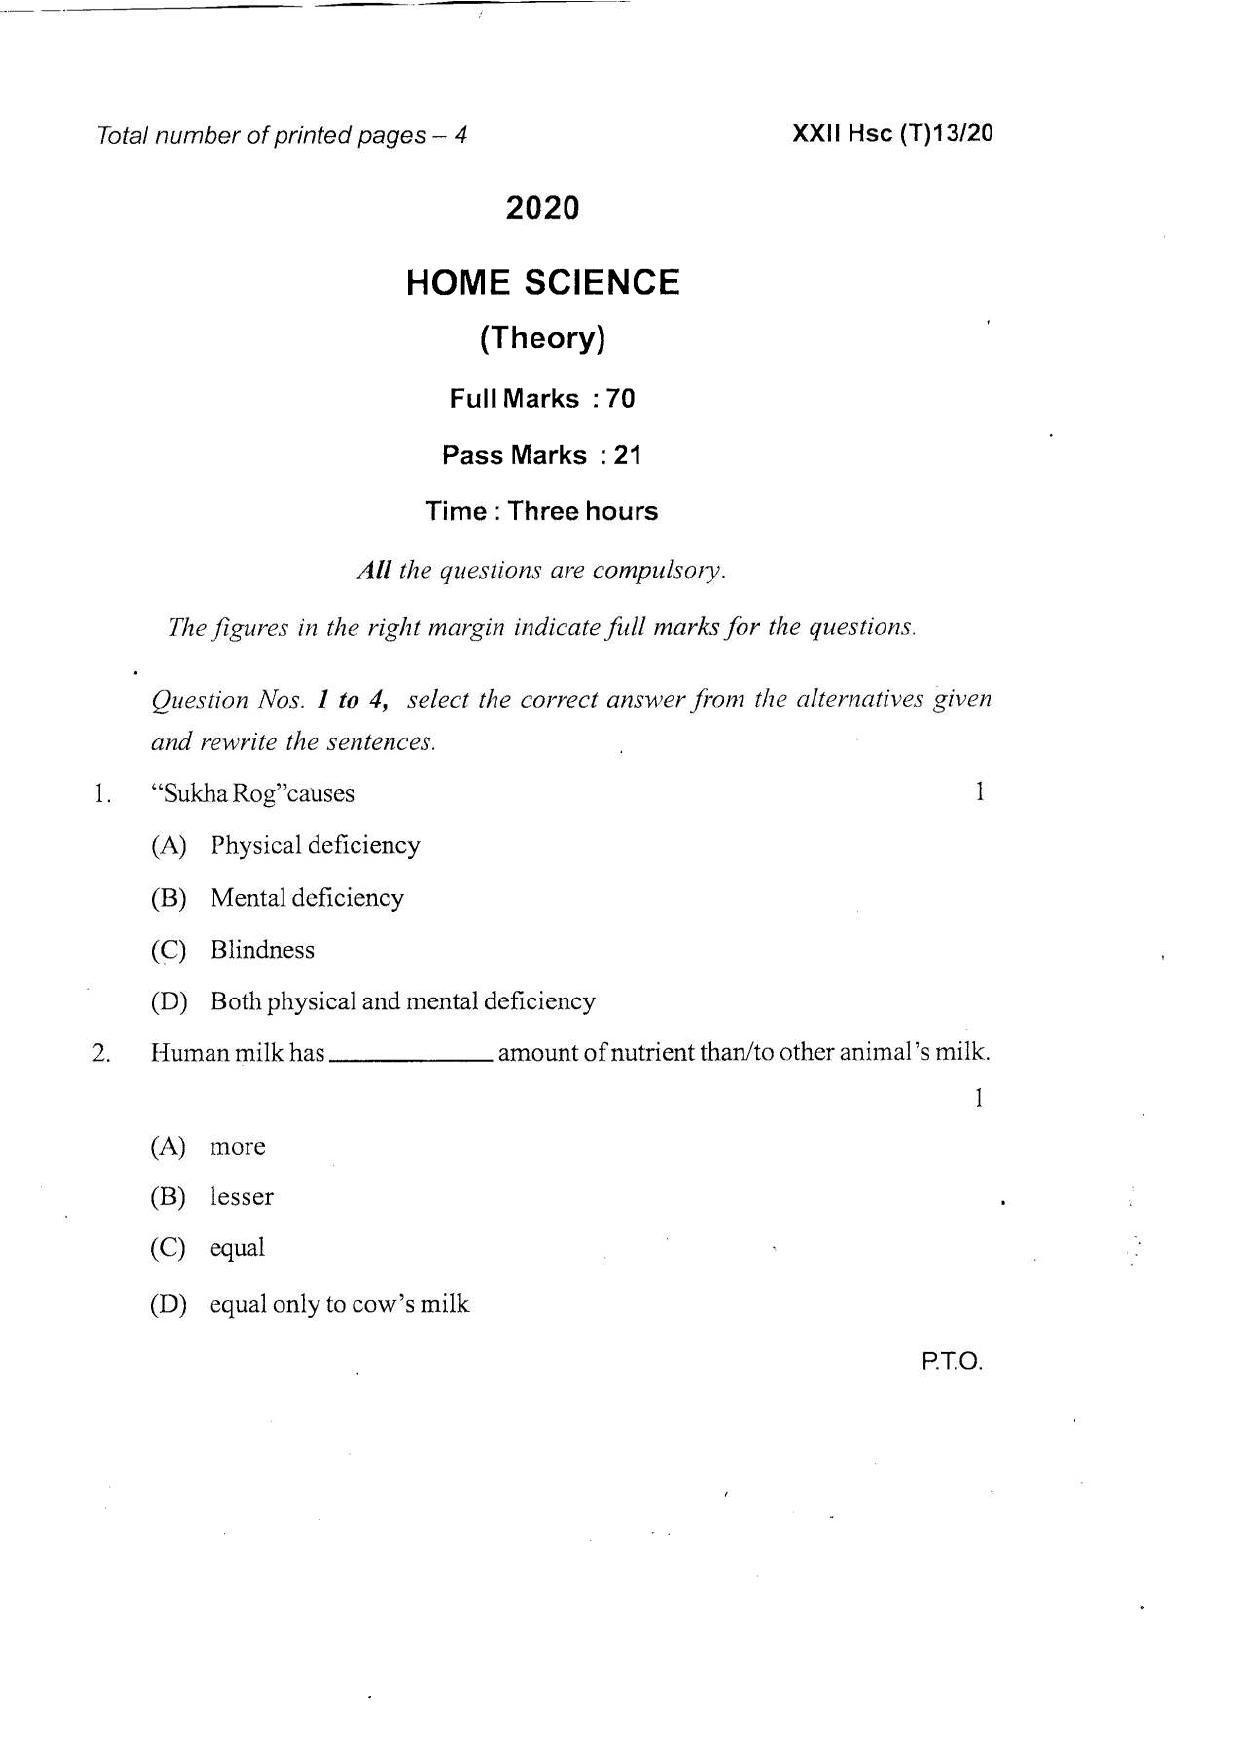 COHSEM Class 12 Home Science Question Papers 2020 - Page 1